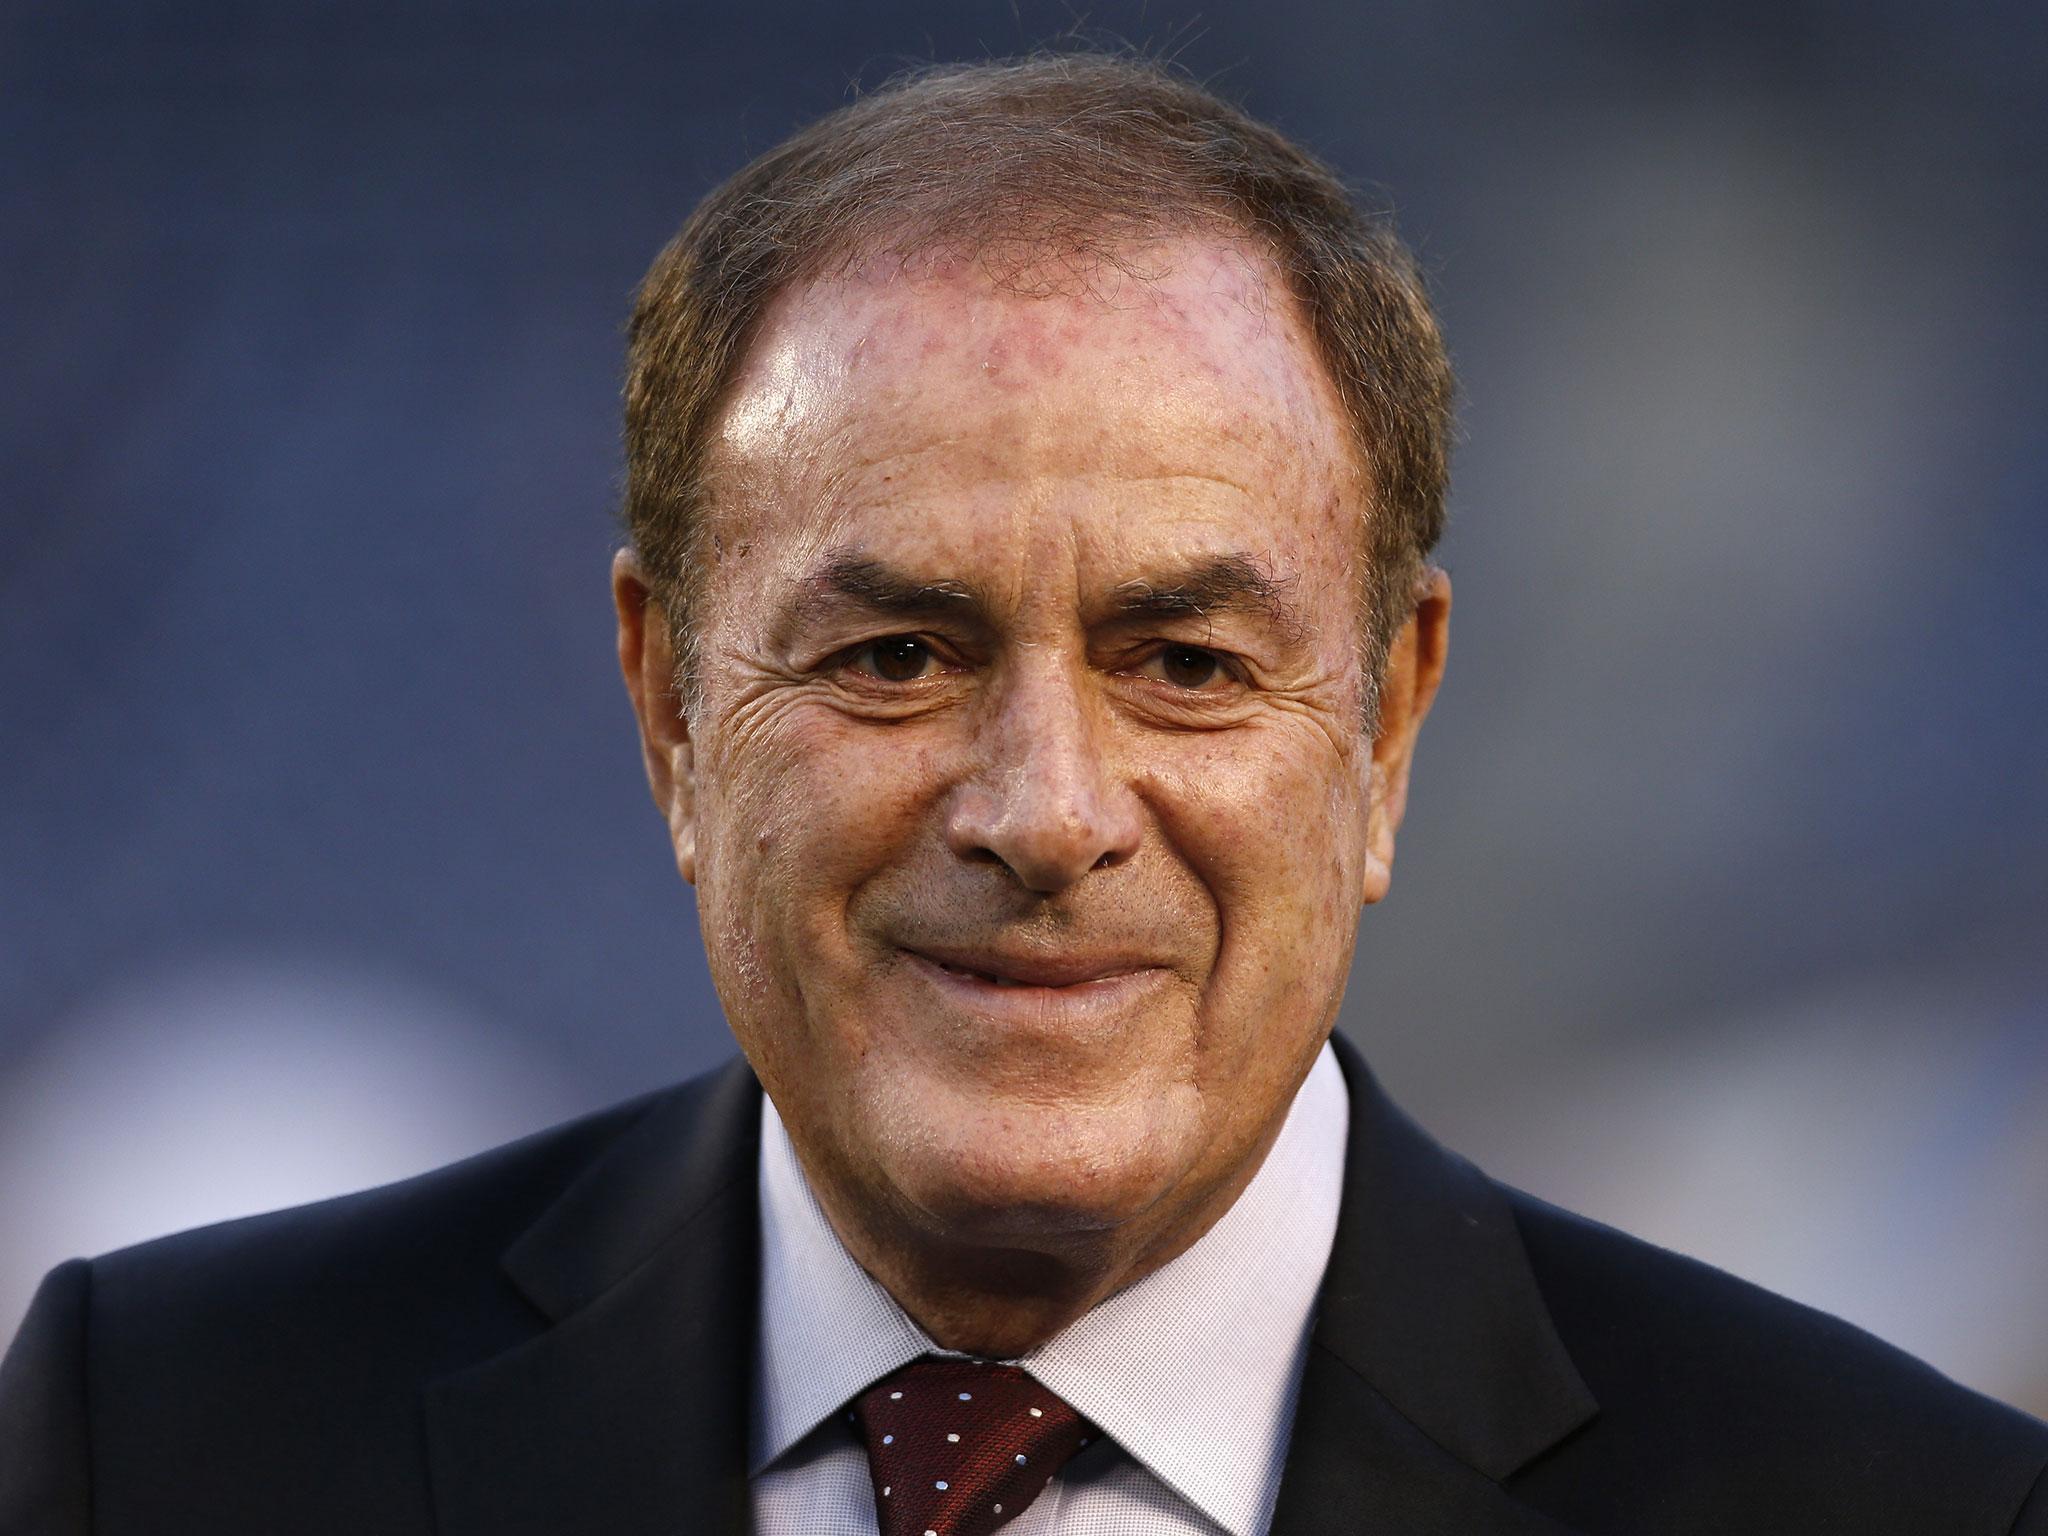 Al Michaels later apologized for the remark